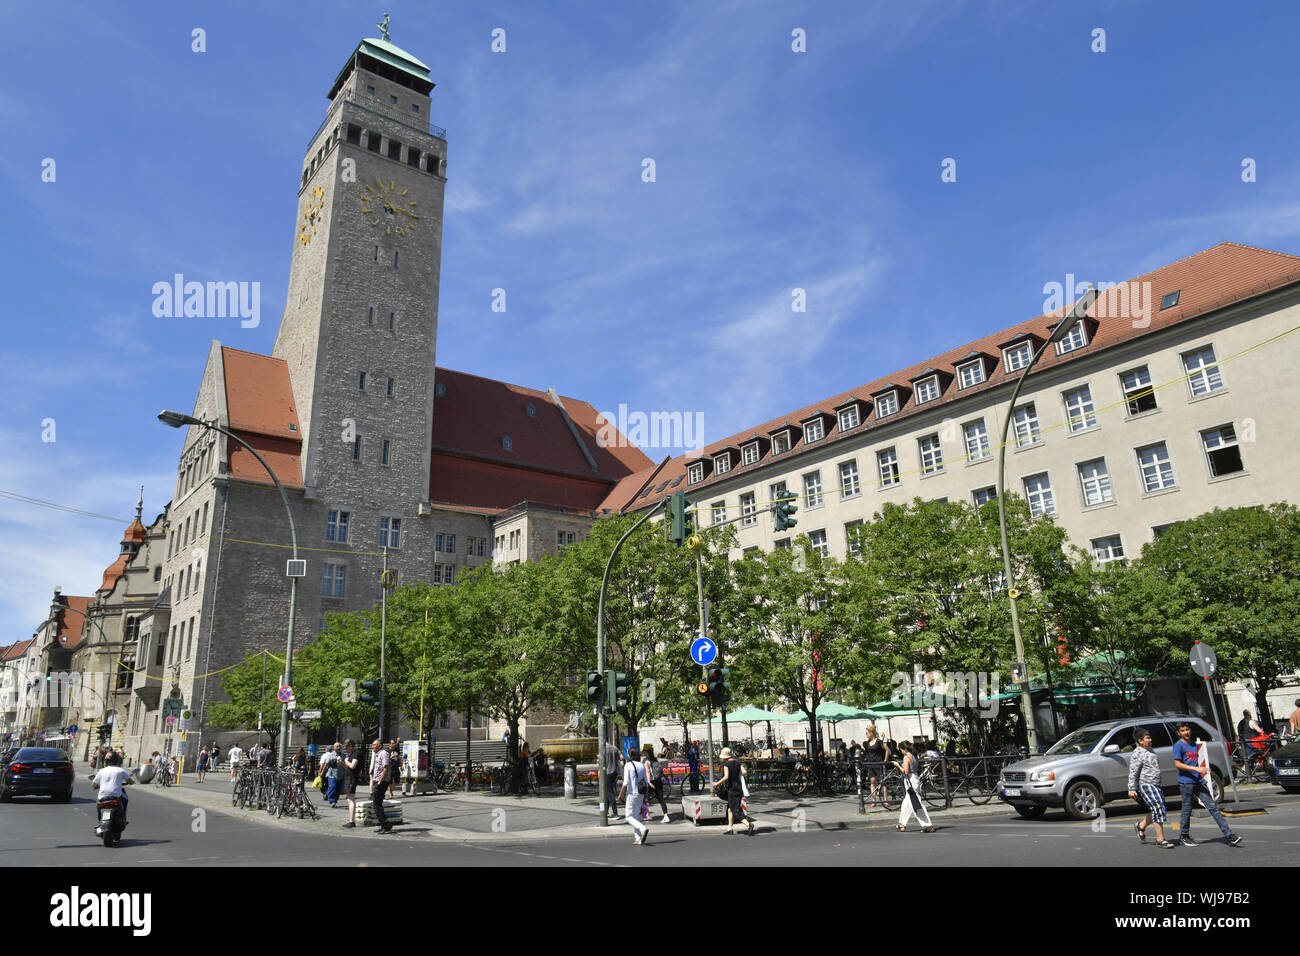 View, architecture, Outside, Outside, outside view, outside view, Berlin, Berlin-Neukoelln, Berlin-Neukölln, district city hall, Germany, facade, buil Stock Photo